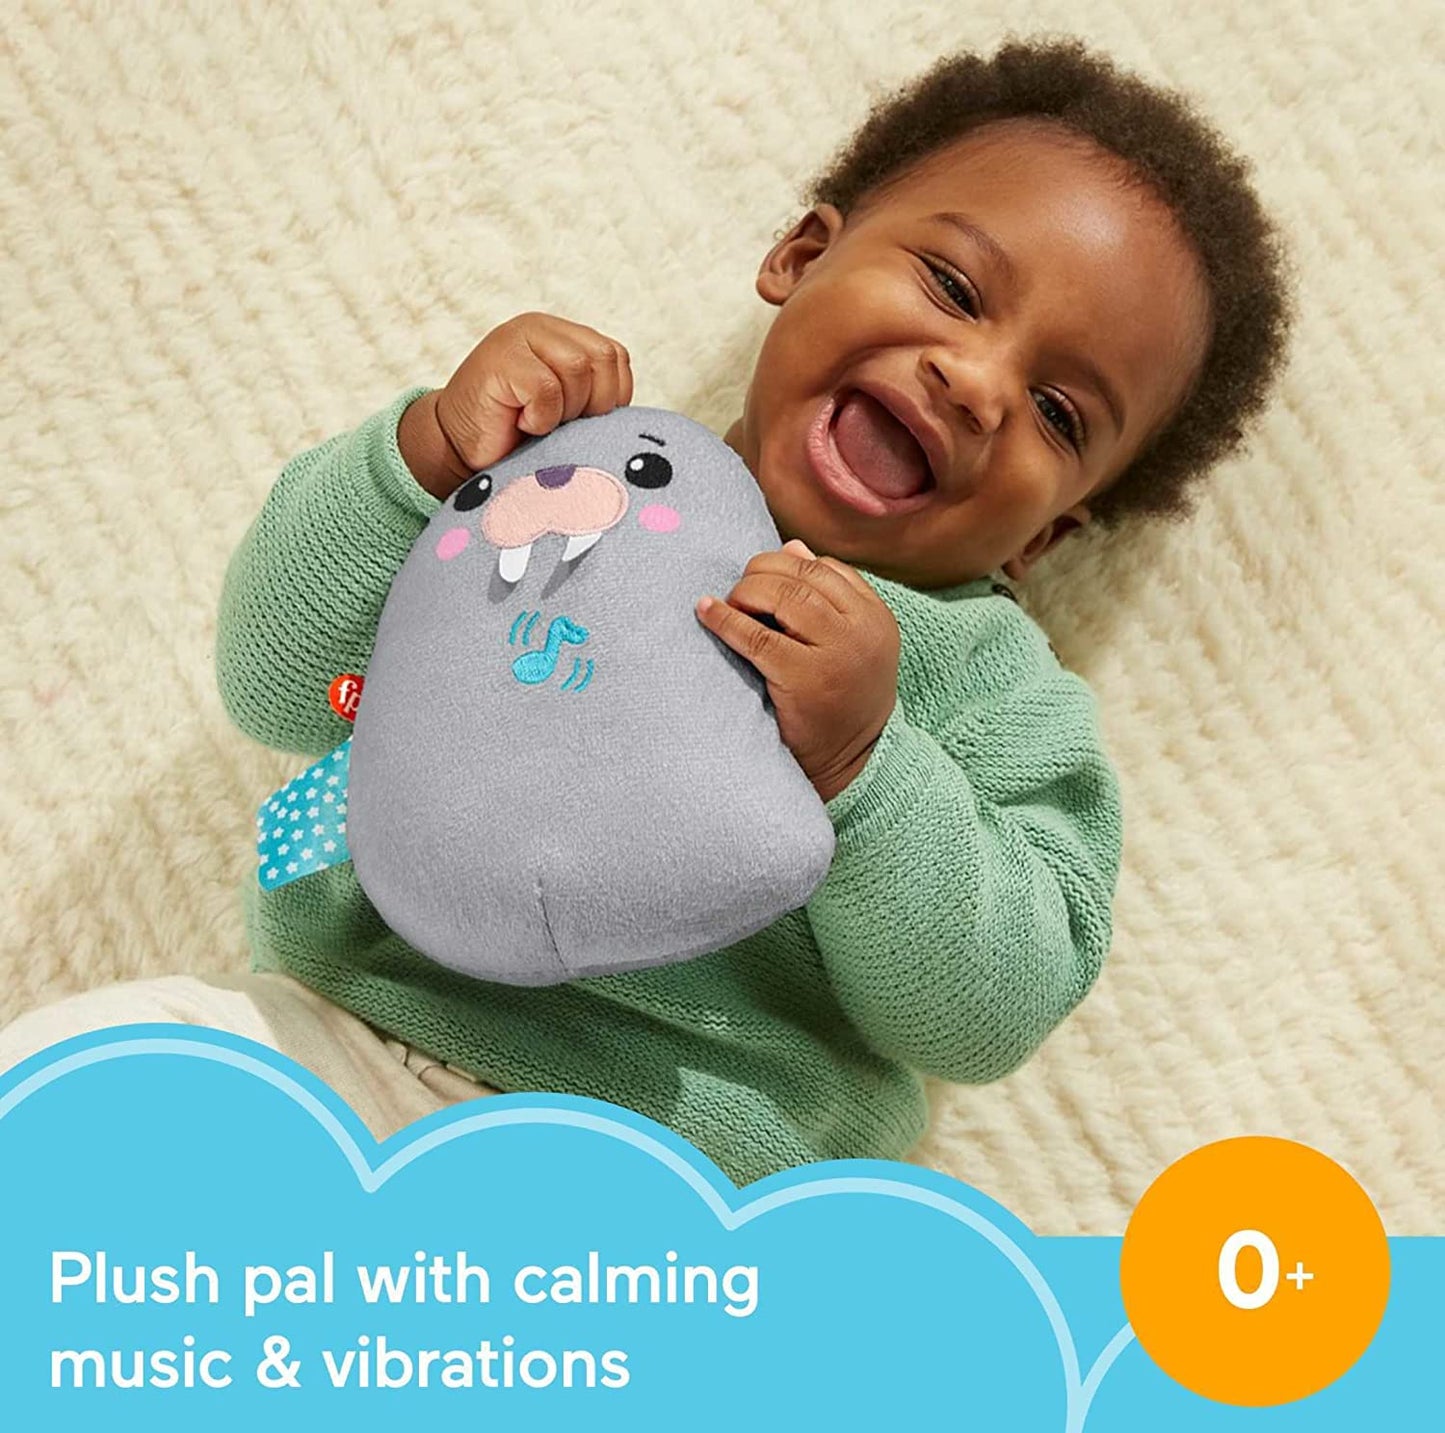 Chill Vibes Walrus Soother, take-Along Musical Plush Toy with Calming Vibrations for Infants | Age :  0-3 Years + by Fisher-price